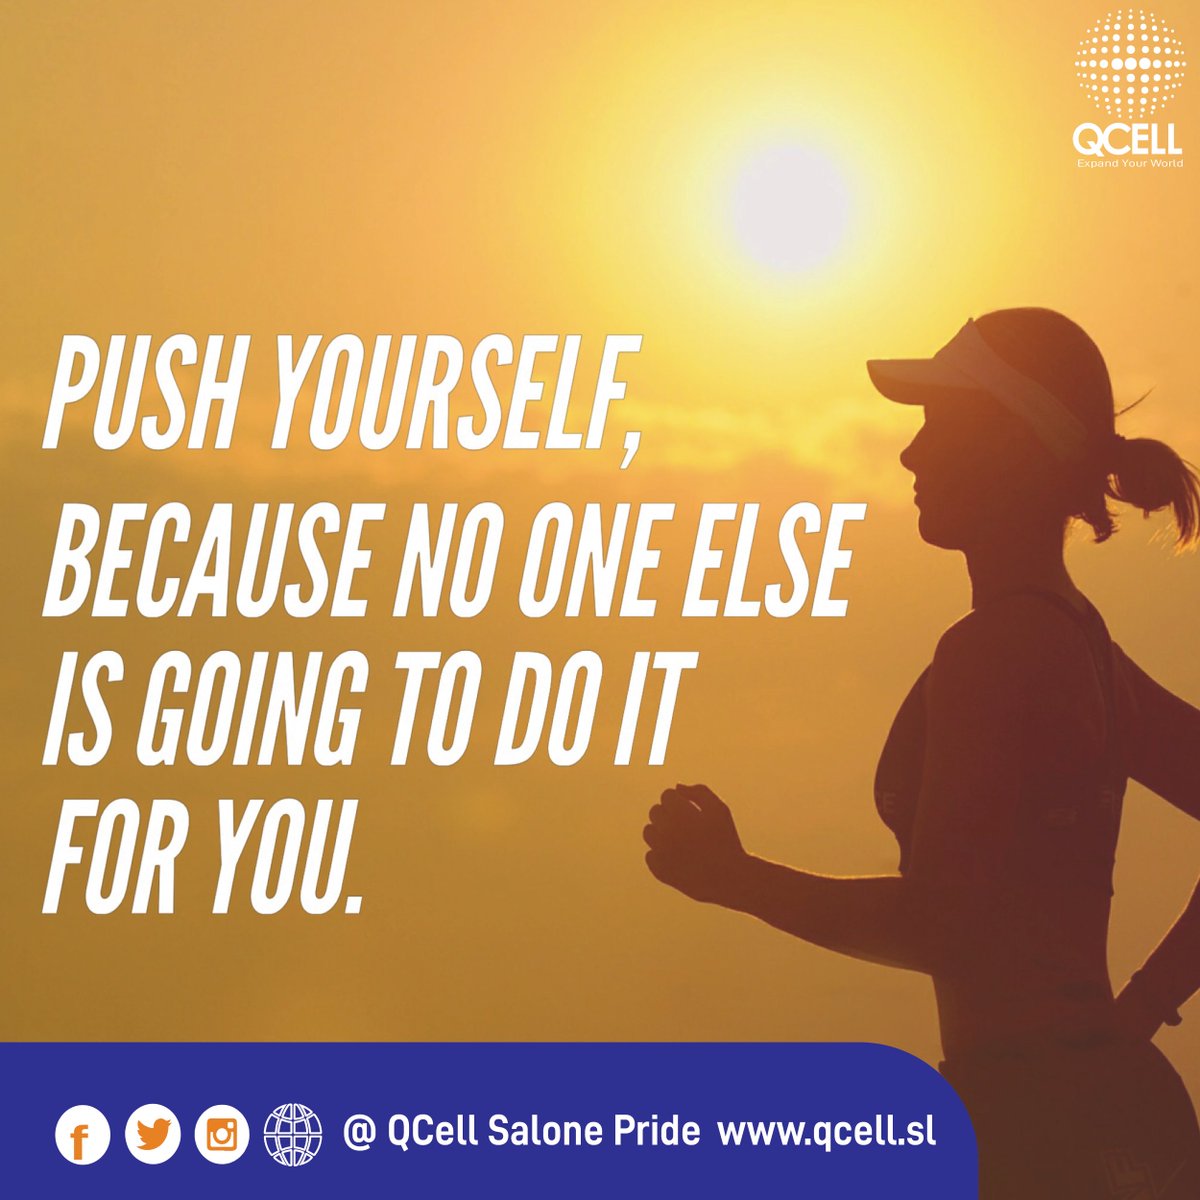 #SaloneTweets #Salonemessenger
#Tuesdayinspiration
Push yourself, Because no one else is going to do it for you.
Happy Tuesday...🥰
#QCellSL